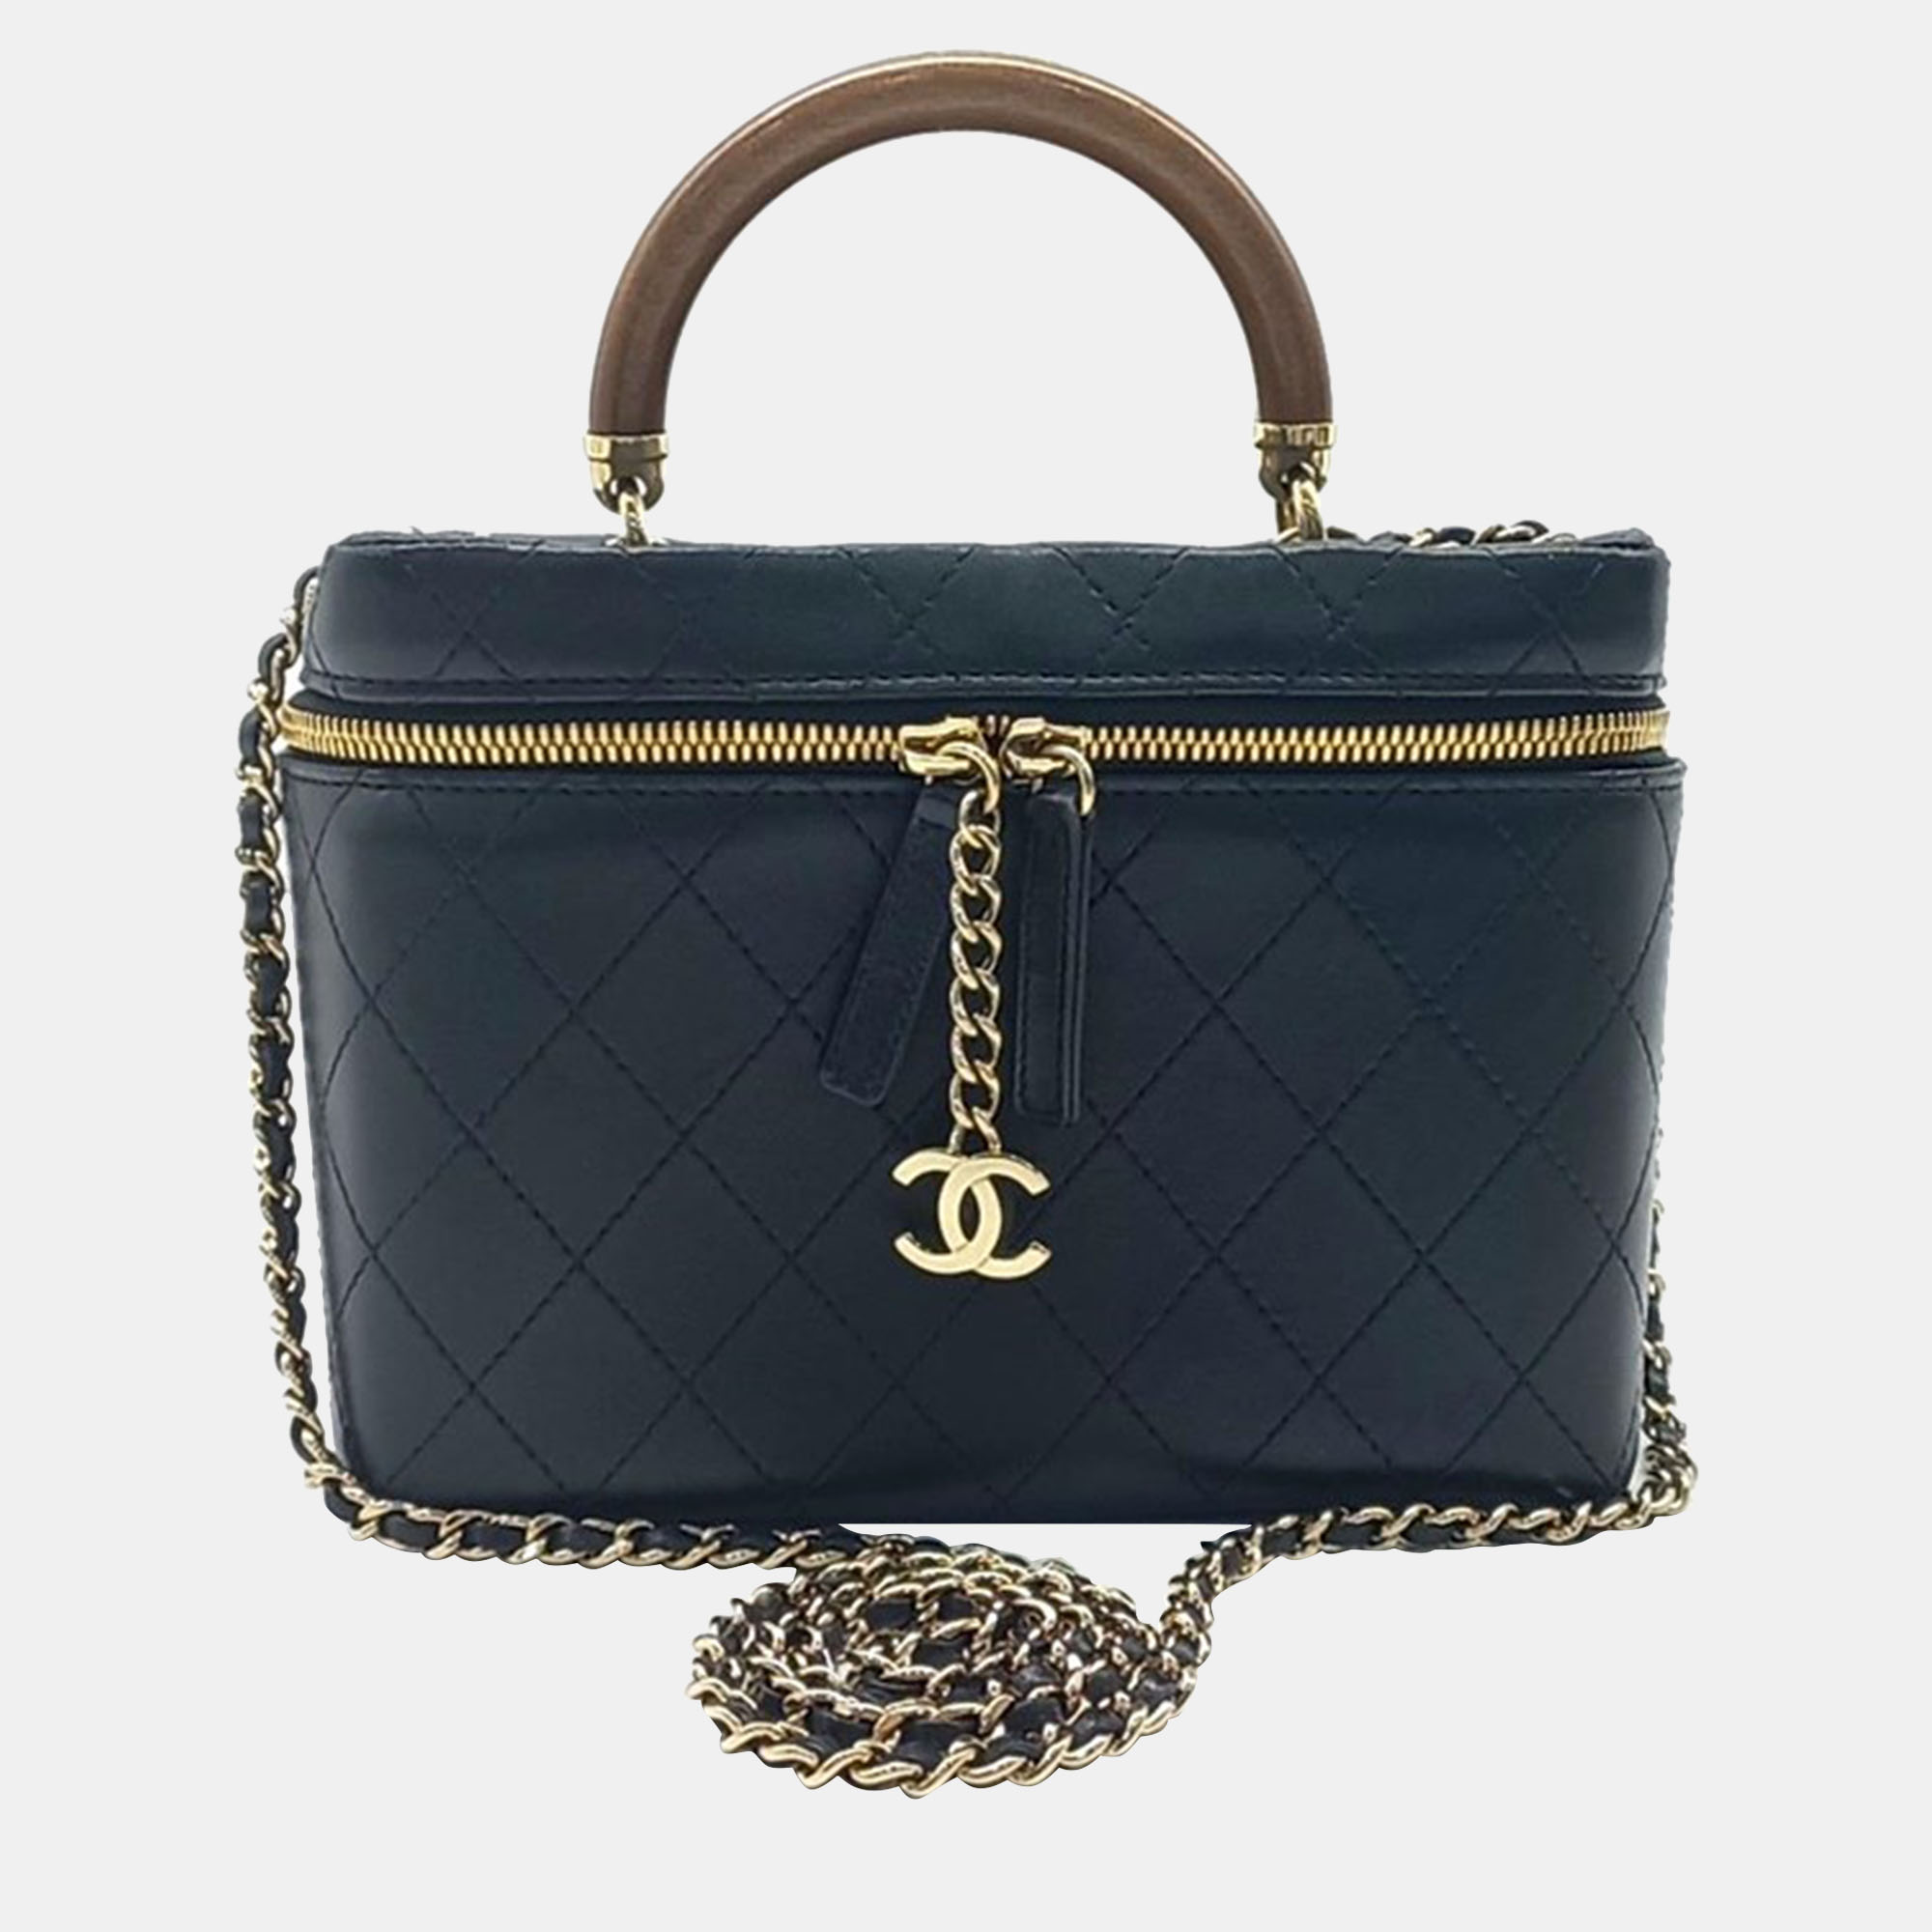 Chanel cosmetic tote and shoulder bag